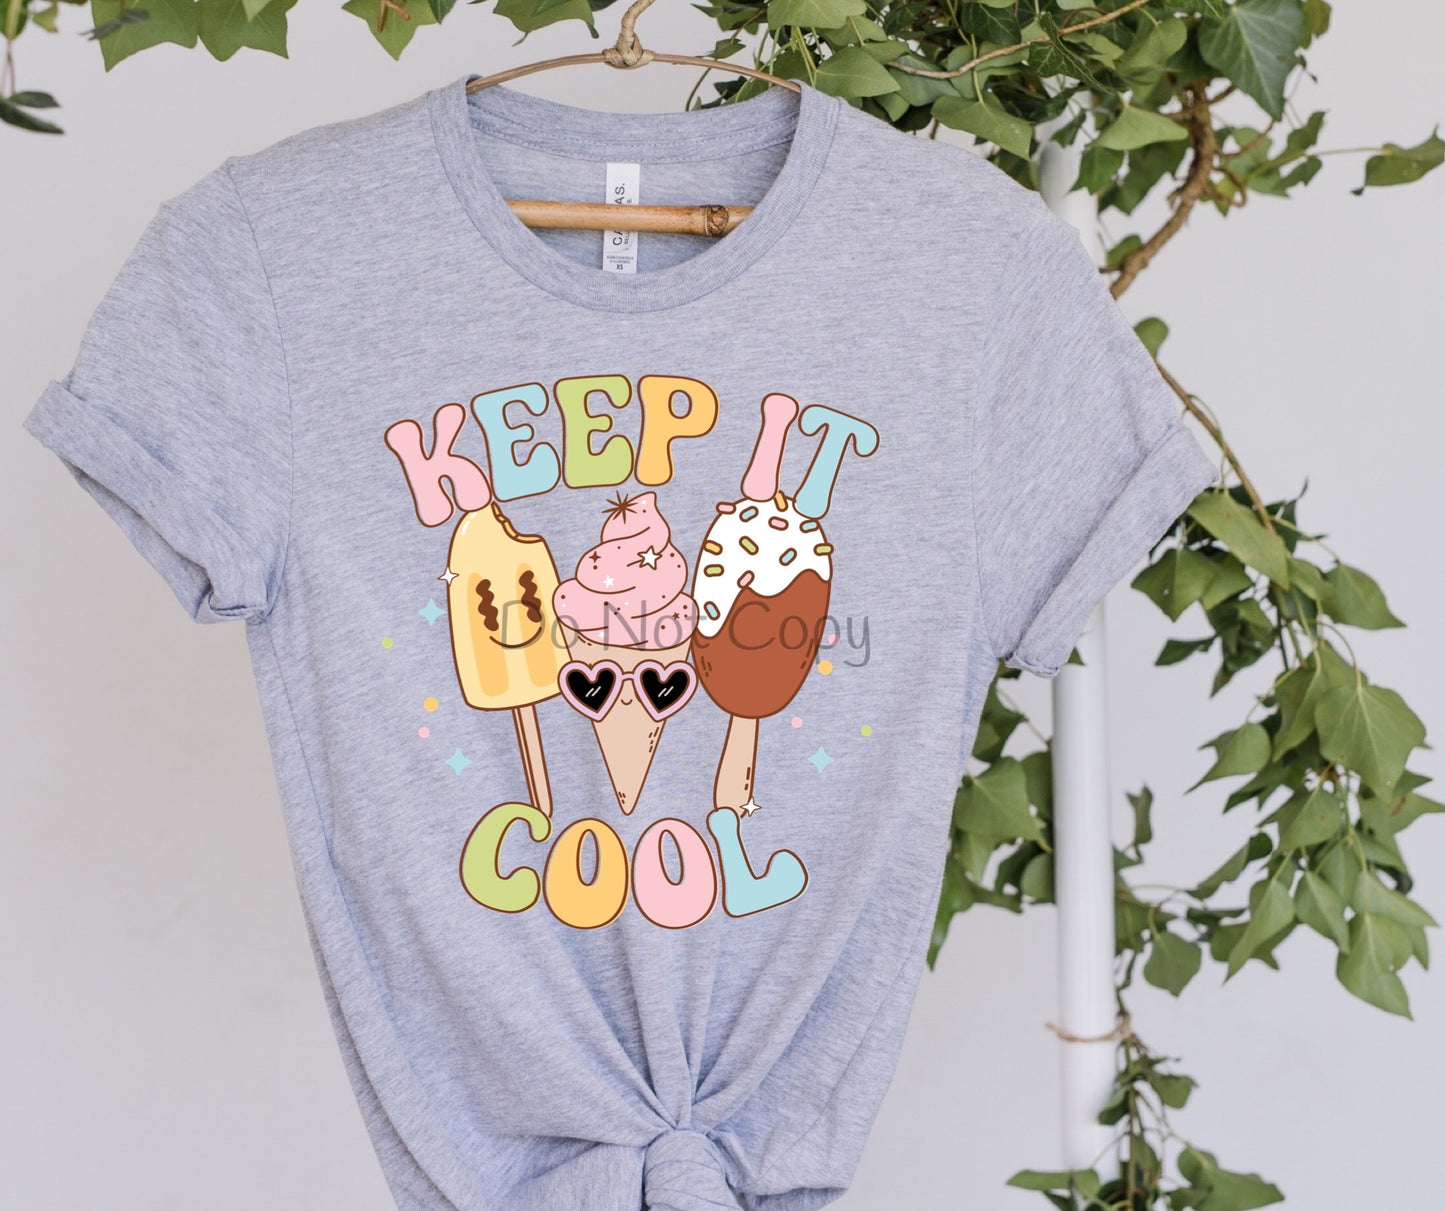 Keep it cool-DTF